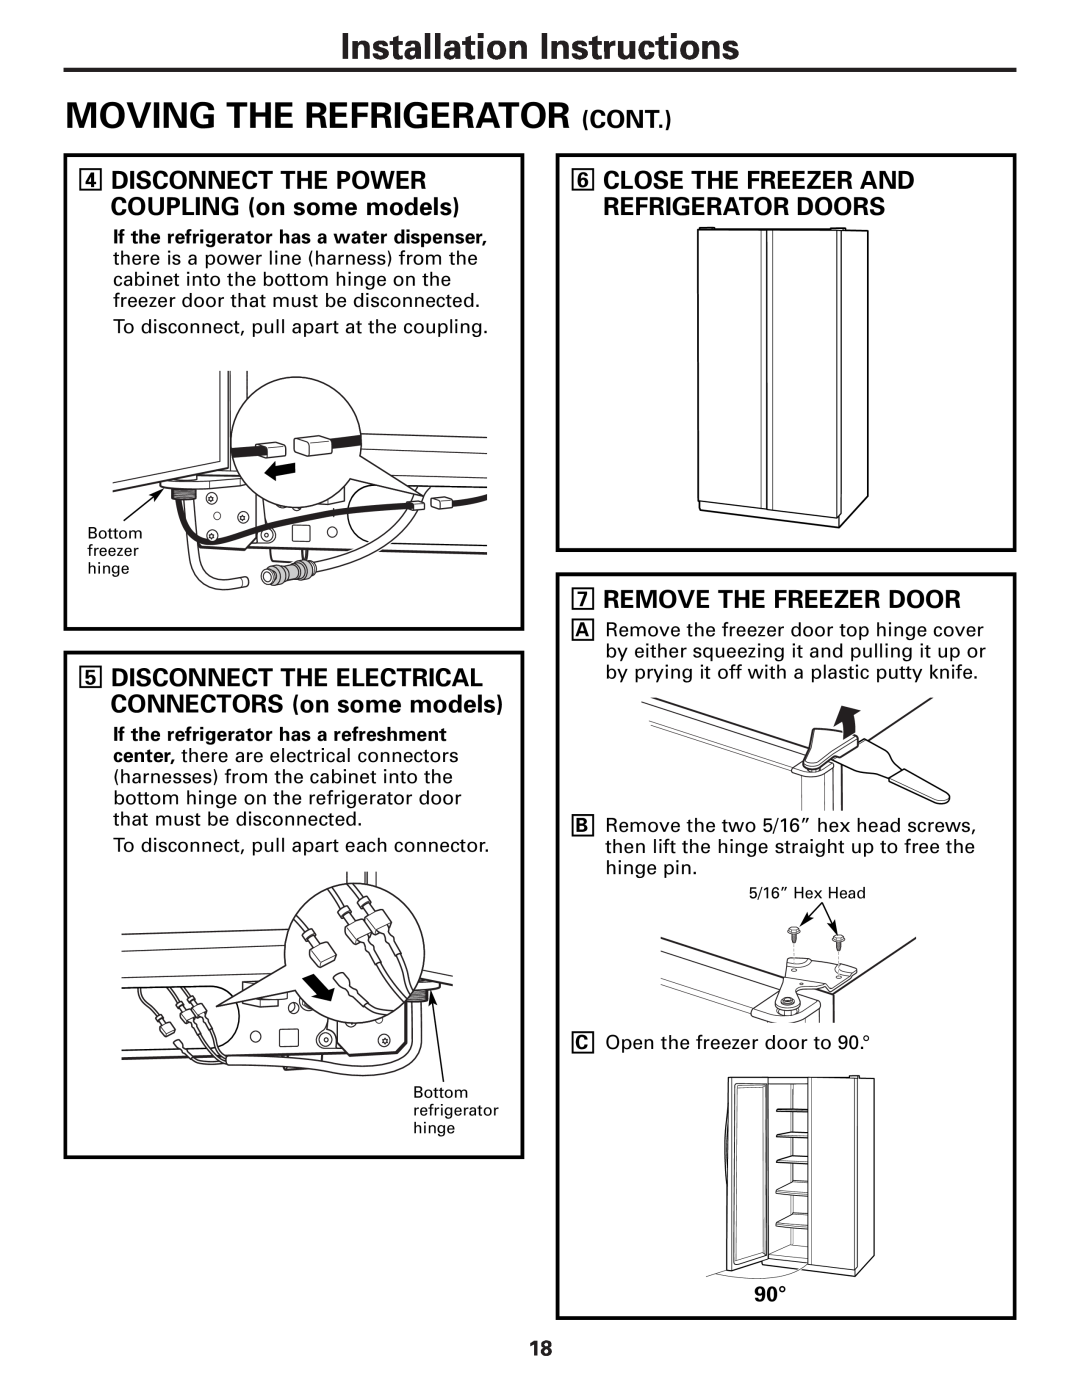 GE Monogram 23 installation instructions Installation Instructions, Moving The Refrigerator Cont, 7REMOVE THE FREEZER DOOR 